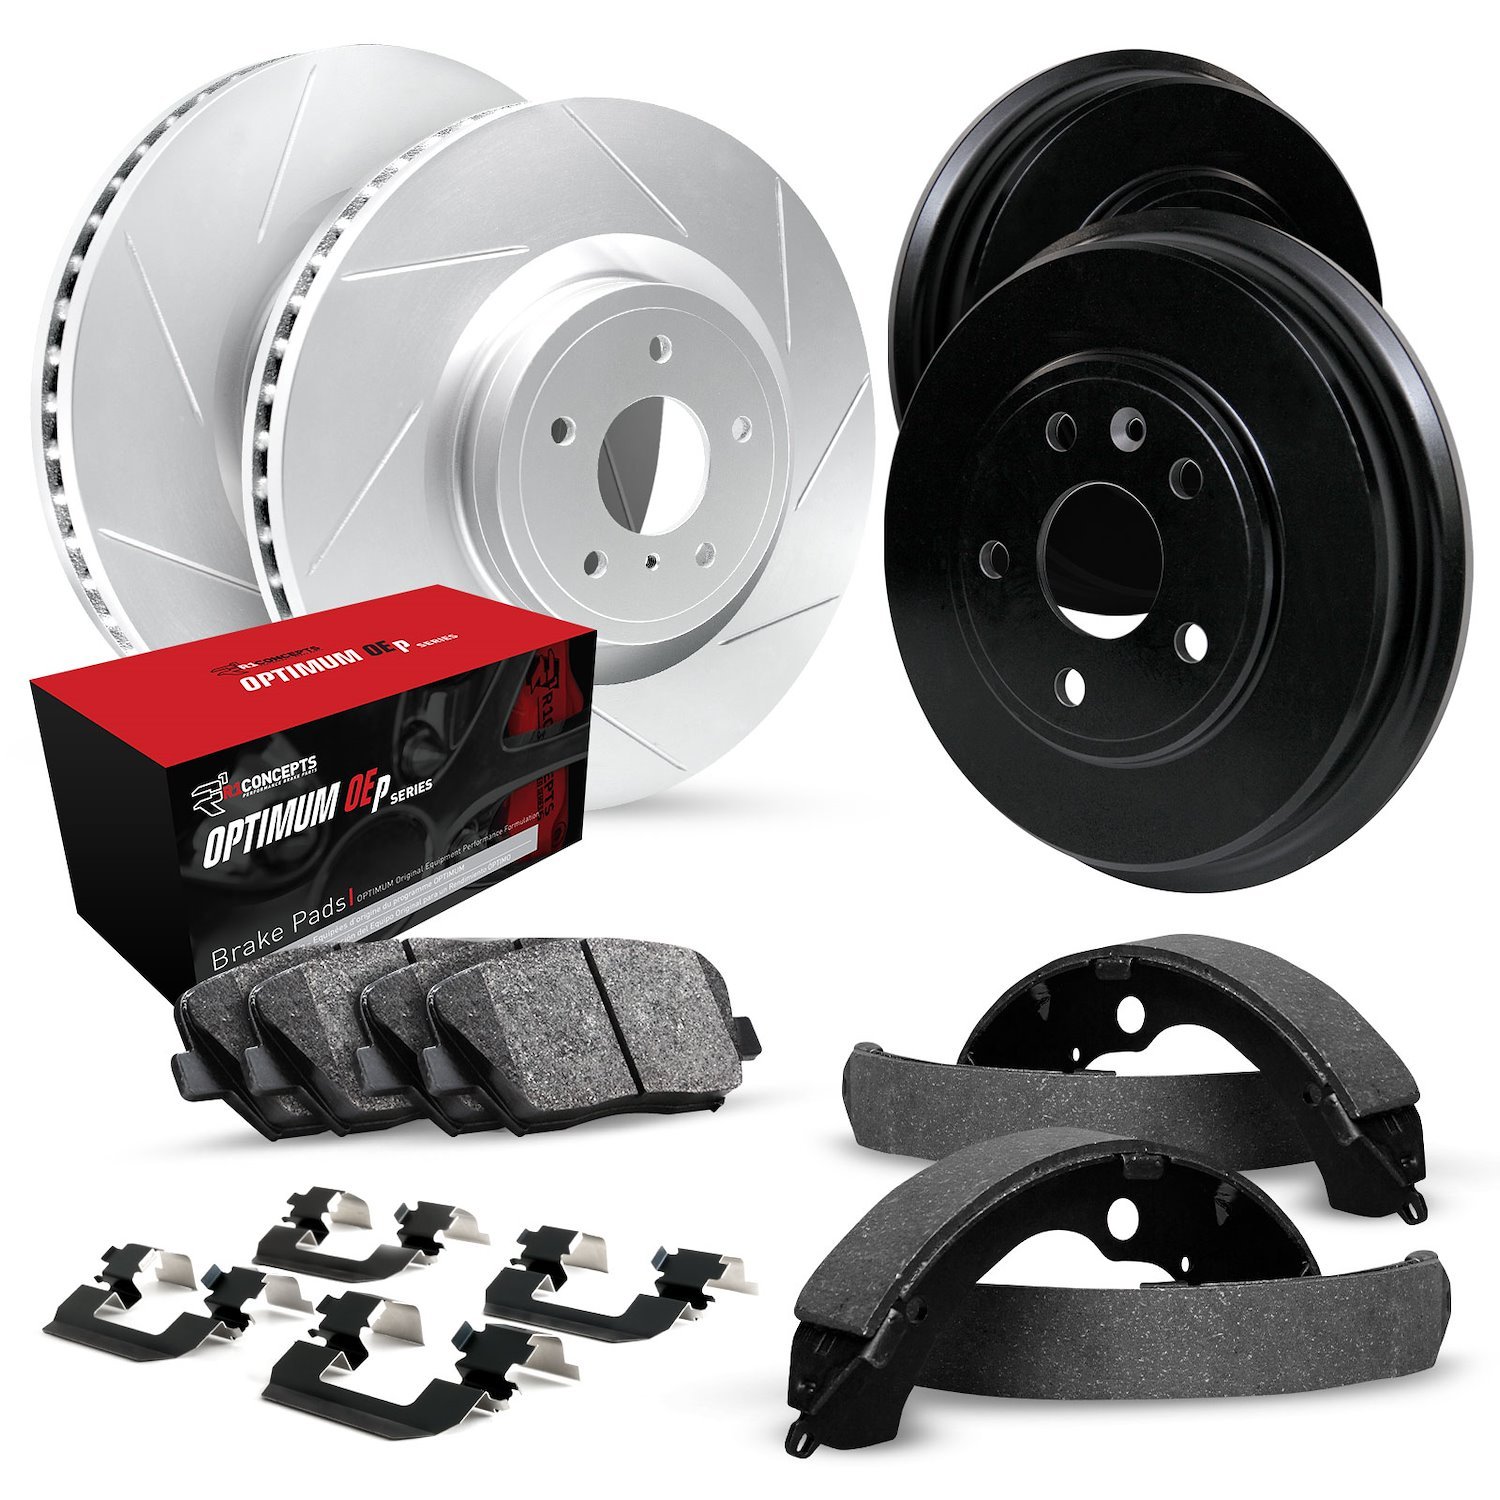 GEO-Carbon Slotted Brake Rotor & Drum Set w/Optimum OE Pads, Shoes, & Hardware, 2005-2007 Ford/Lincoln/Mercury/Mazda